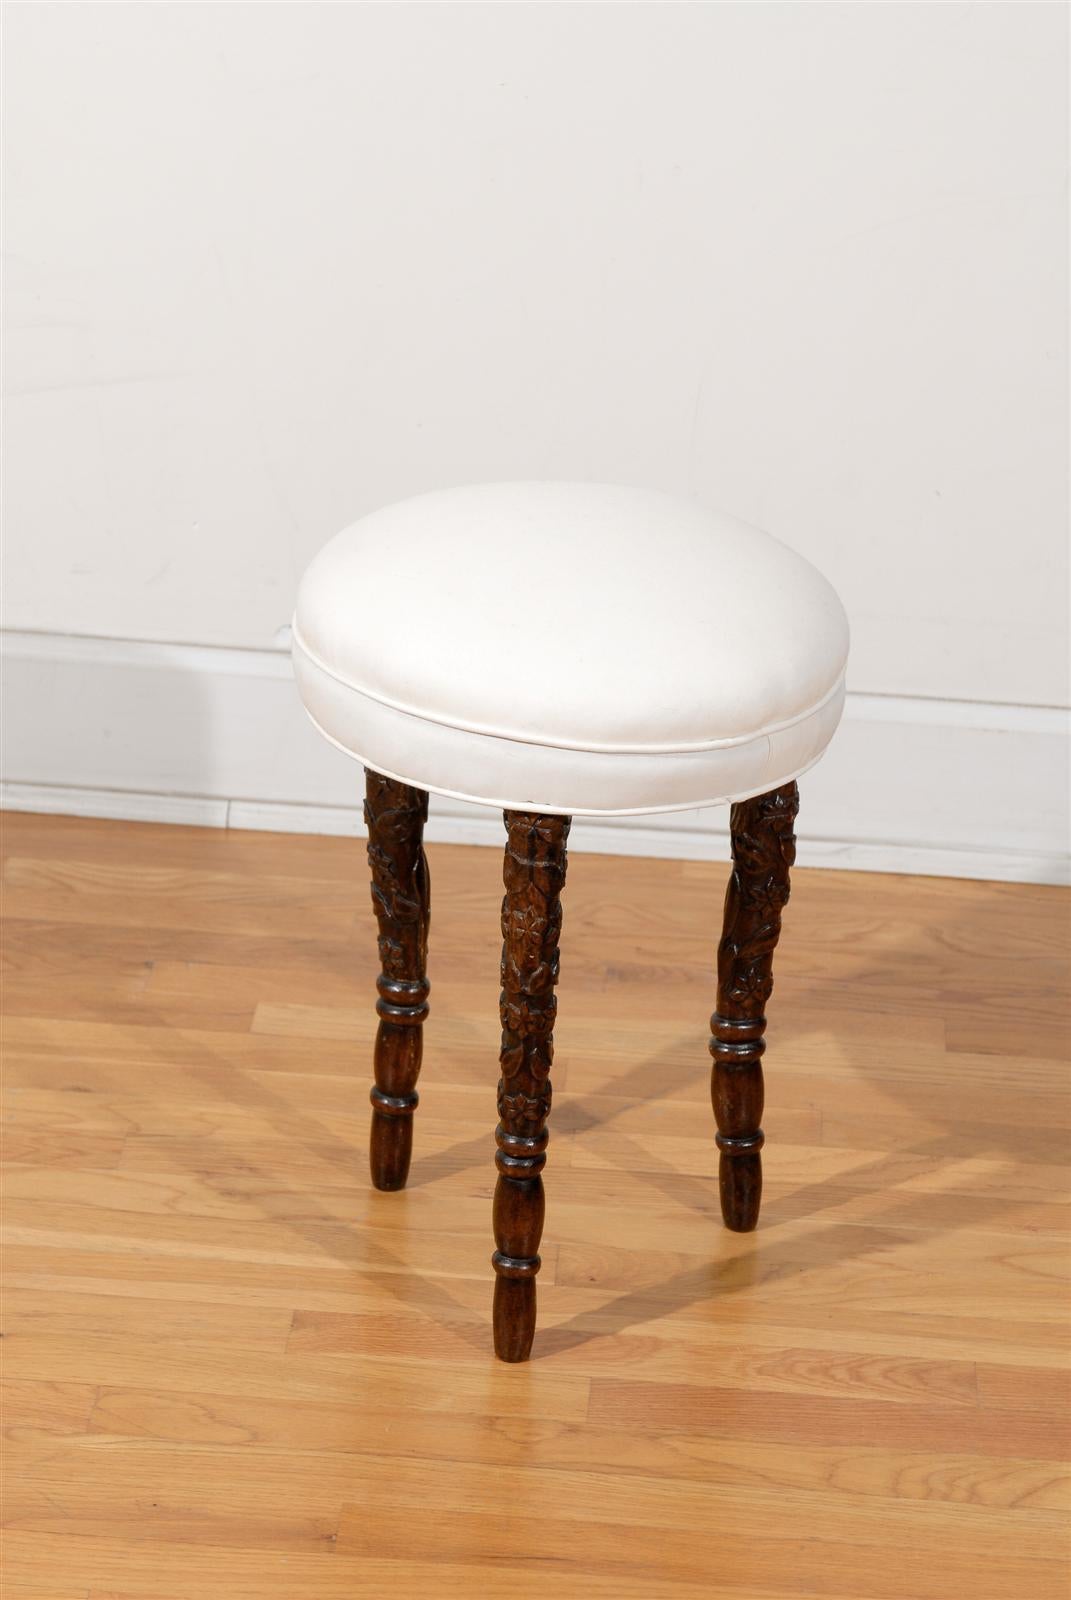 Upholstery Black Forest German 1880s Single Stool with Upholstered Seat and Carved Legs